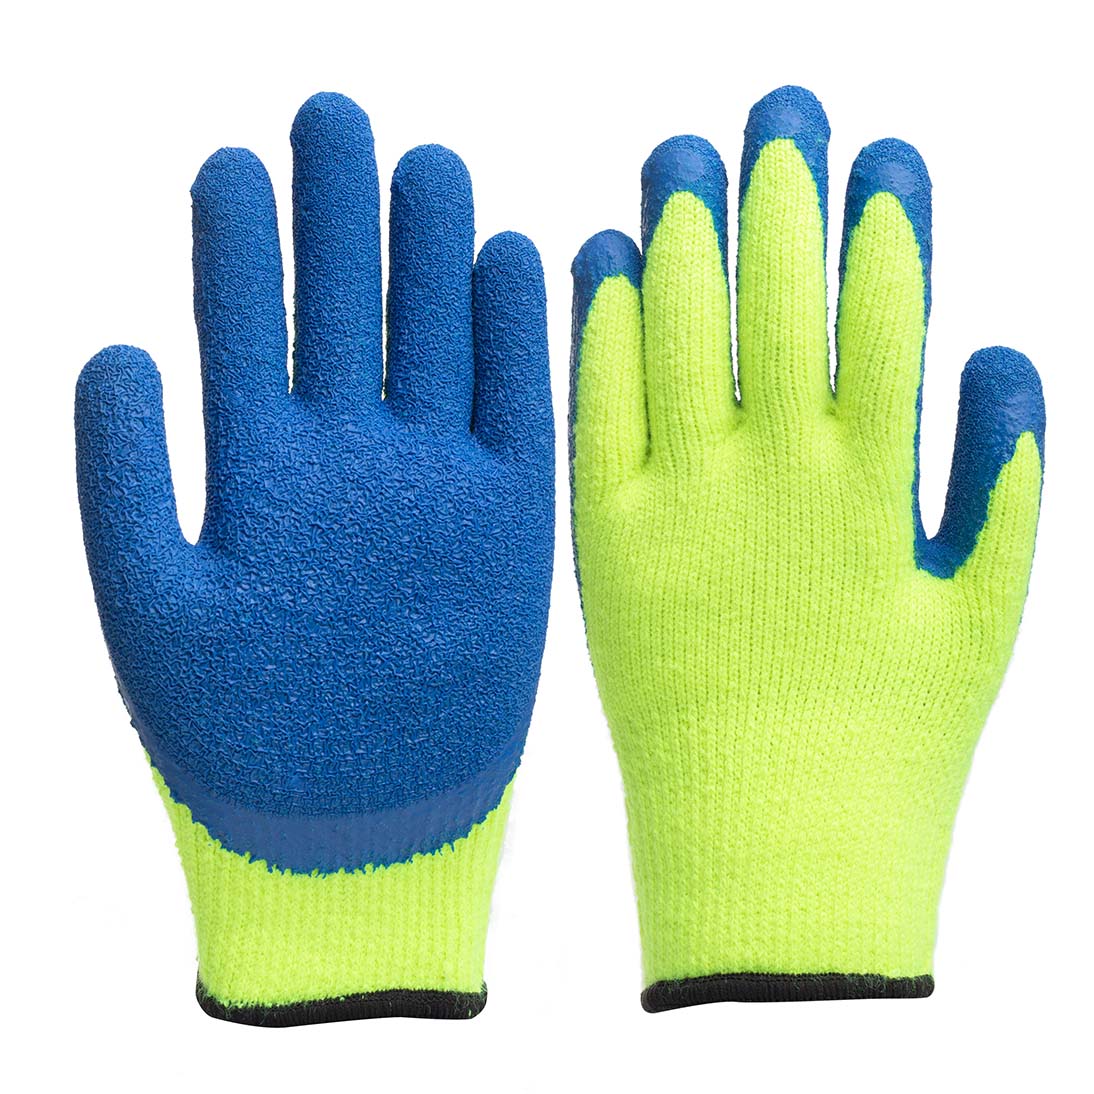 7G Acrylic terry brushed glove crinkle latex palm coated